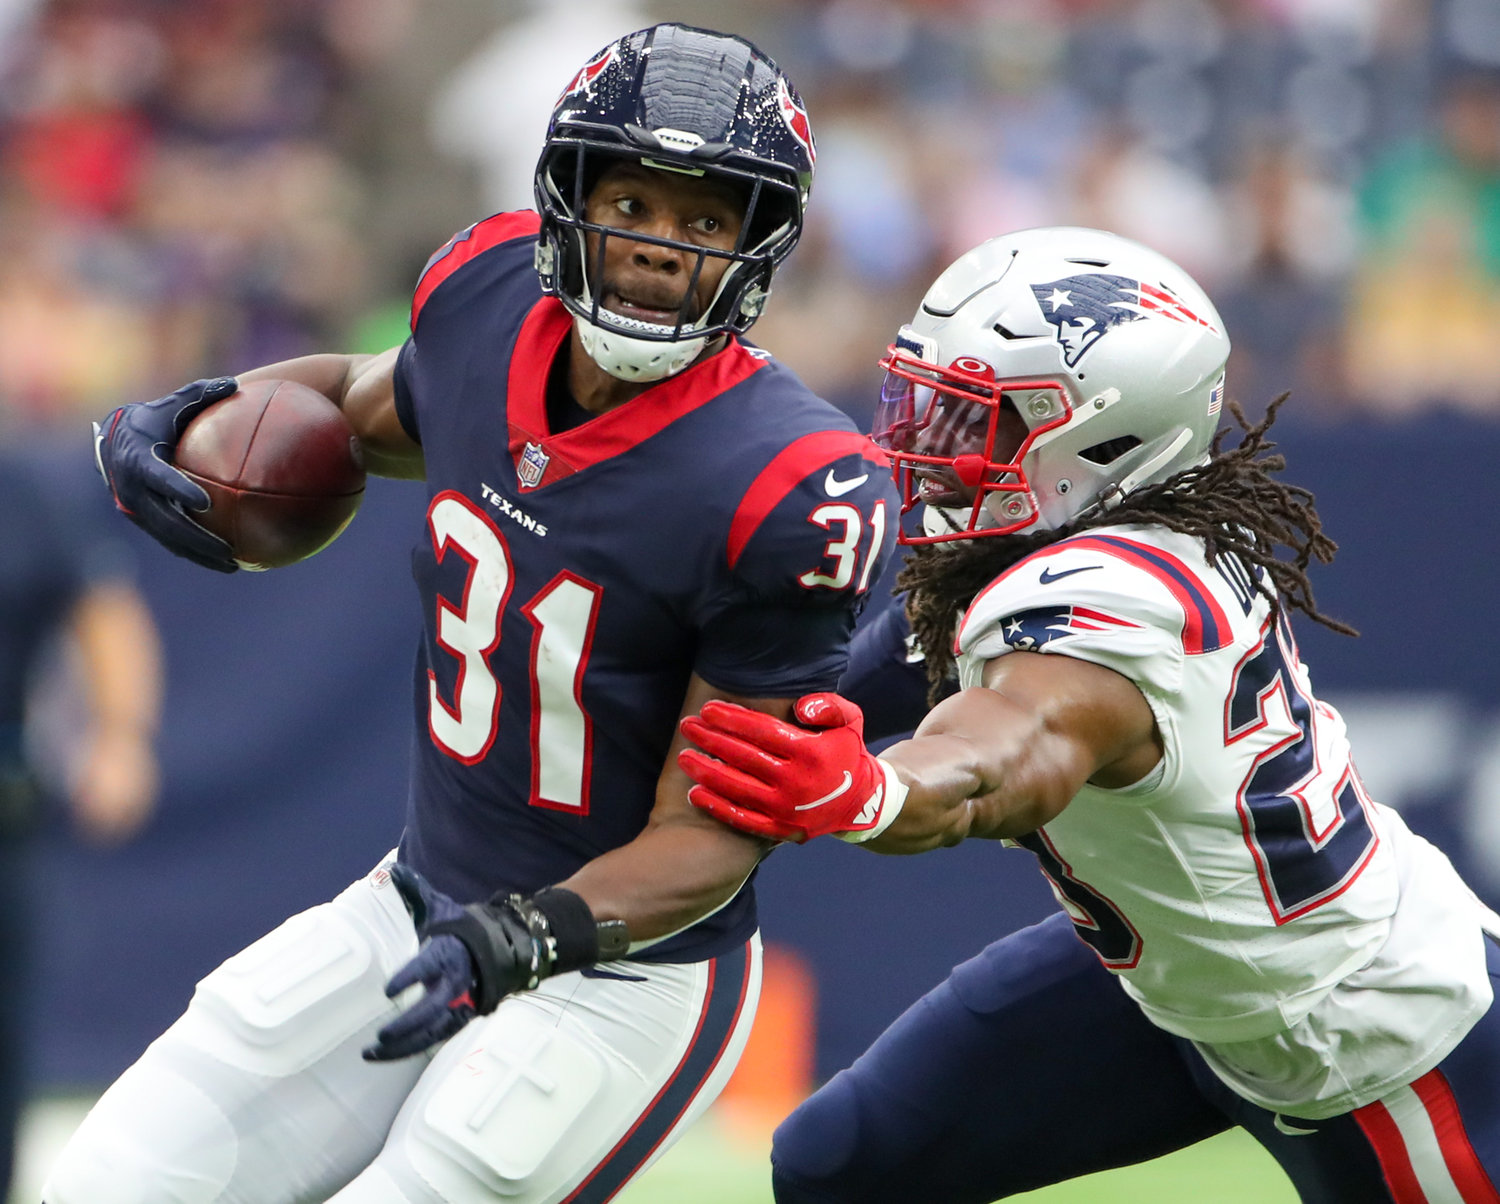 Houston Texans running back David Johnson (31) carries the ball during an NFL game between Houston and New England on October 10, 2021 in Houston, Texas. The Patriots won 25-22.